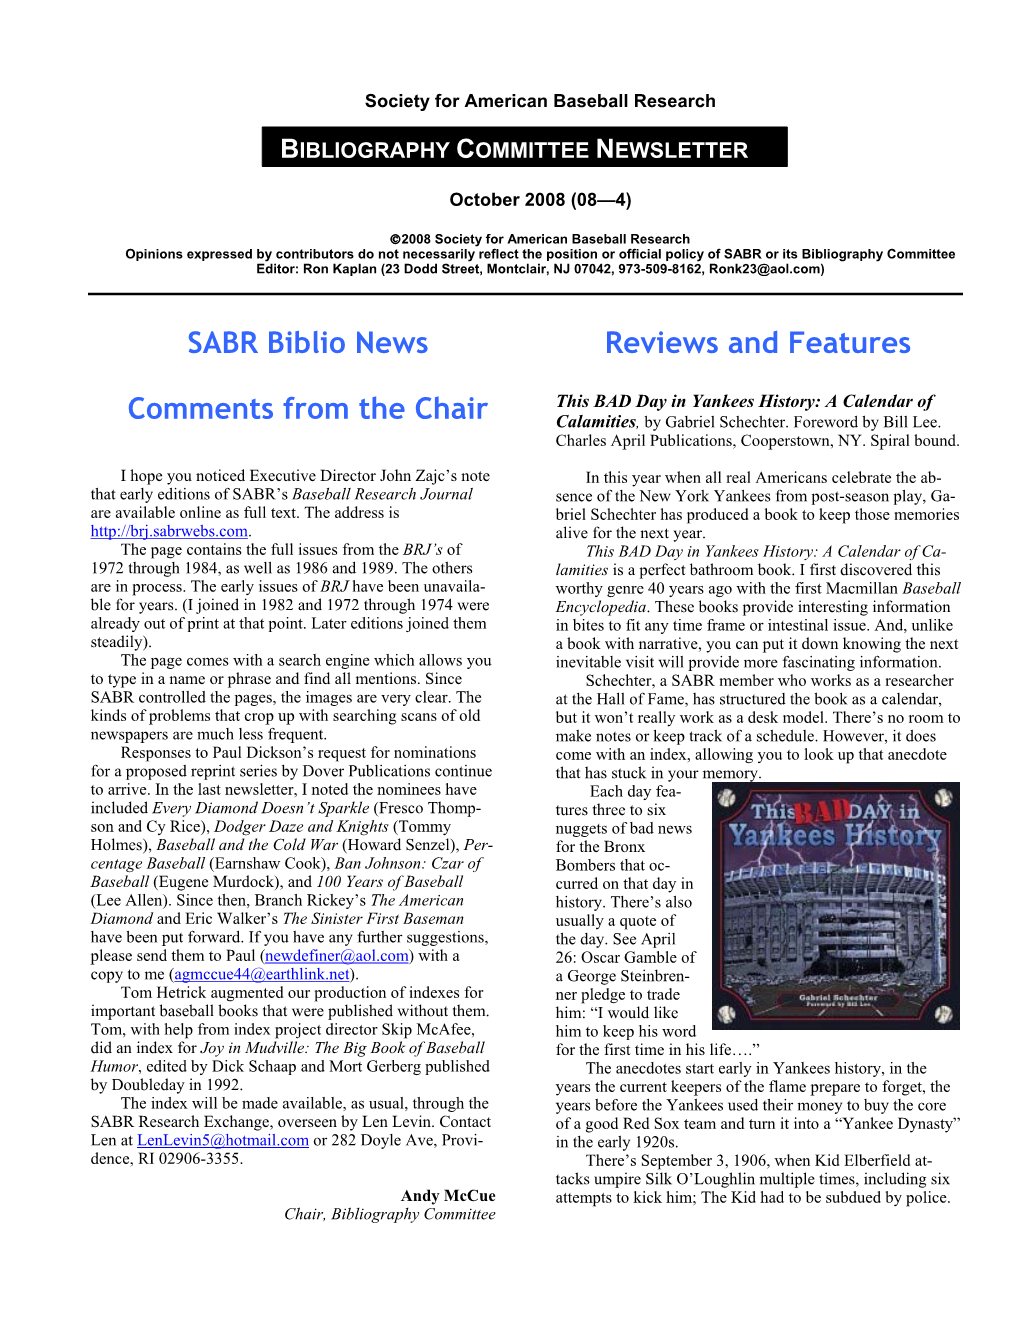 SABR Biblio News Comments from the Chair Reviews and Features